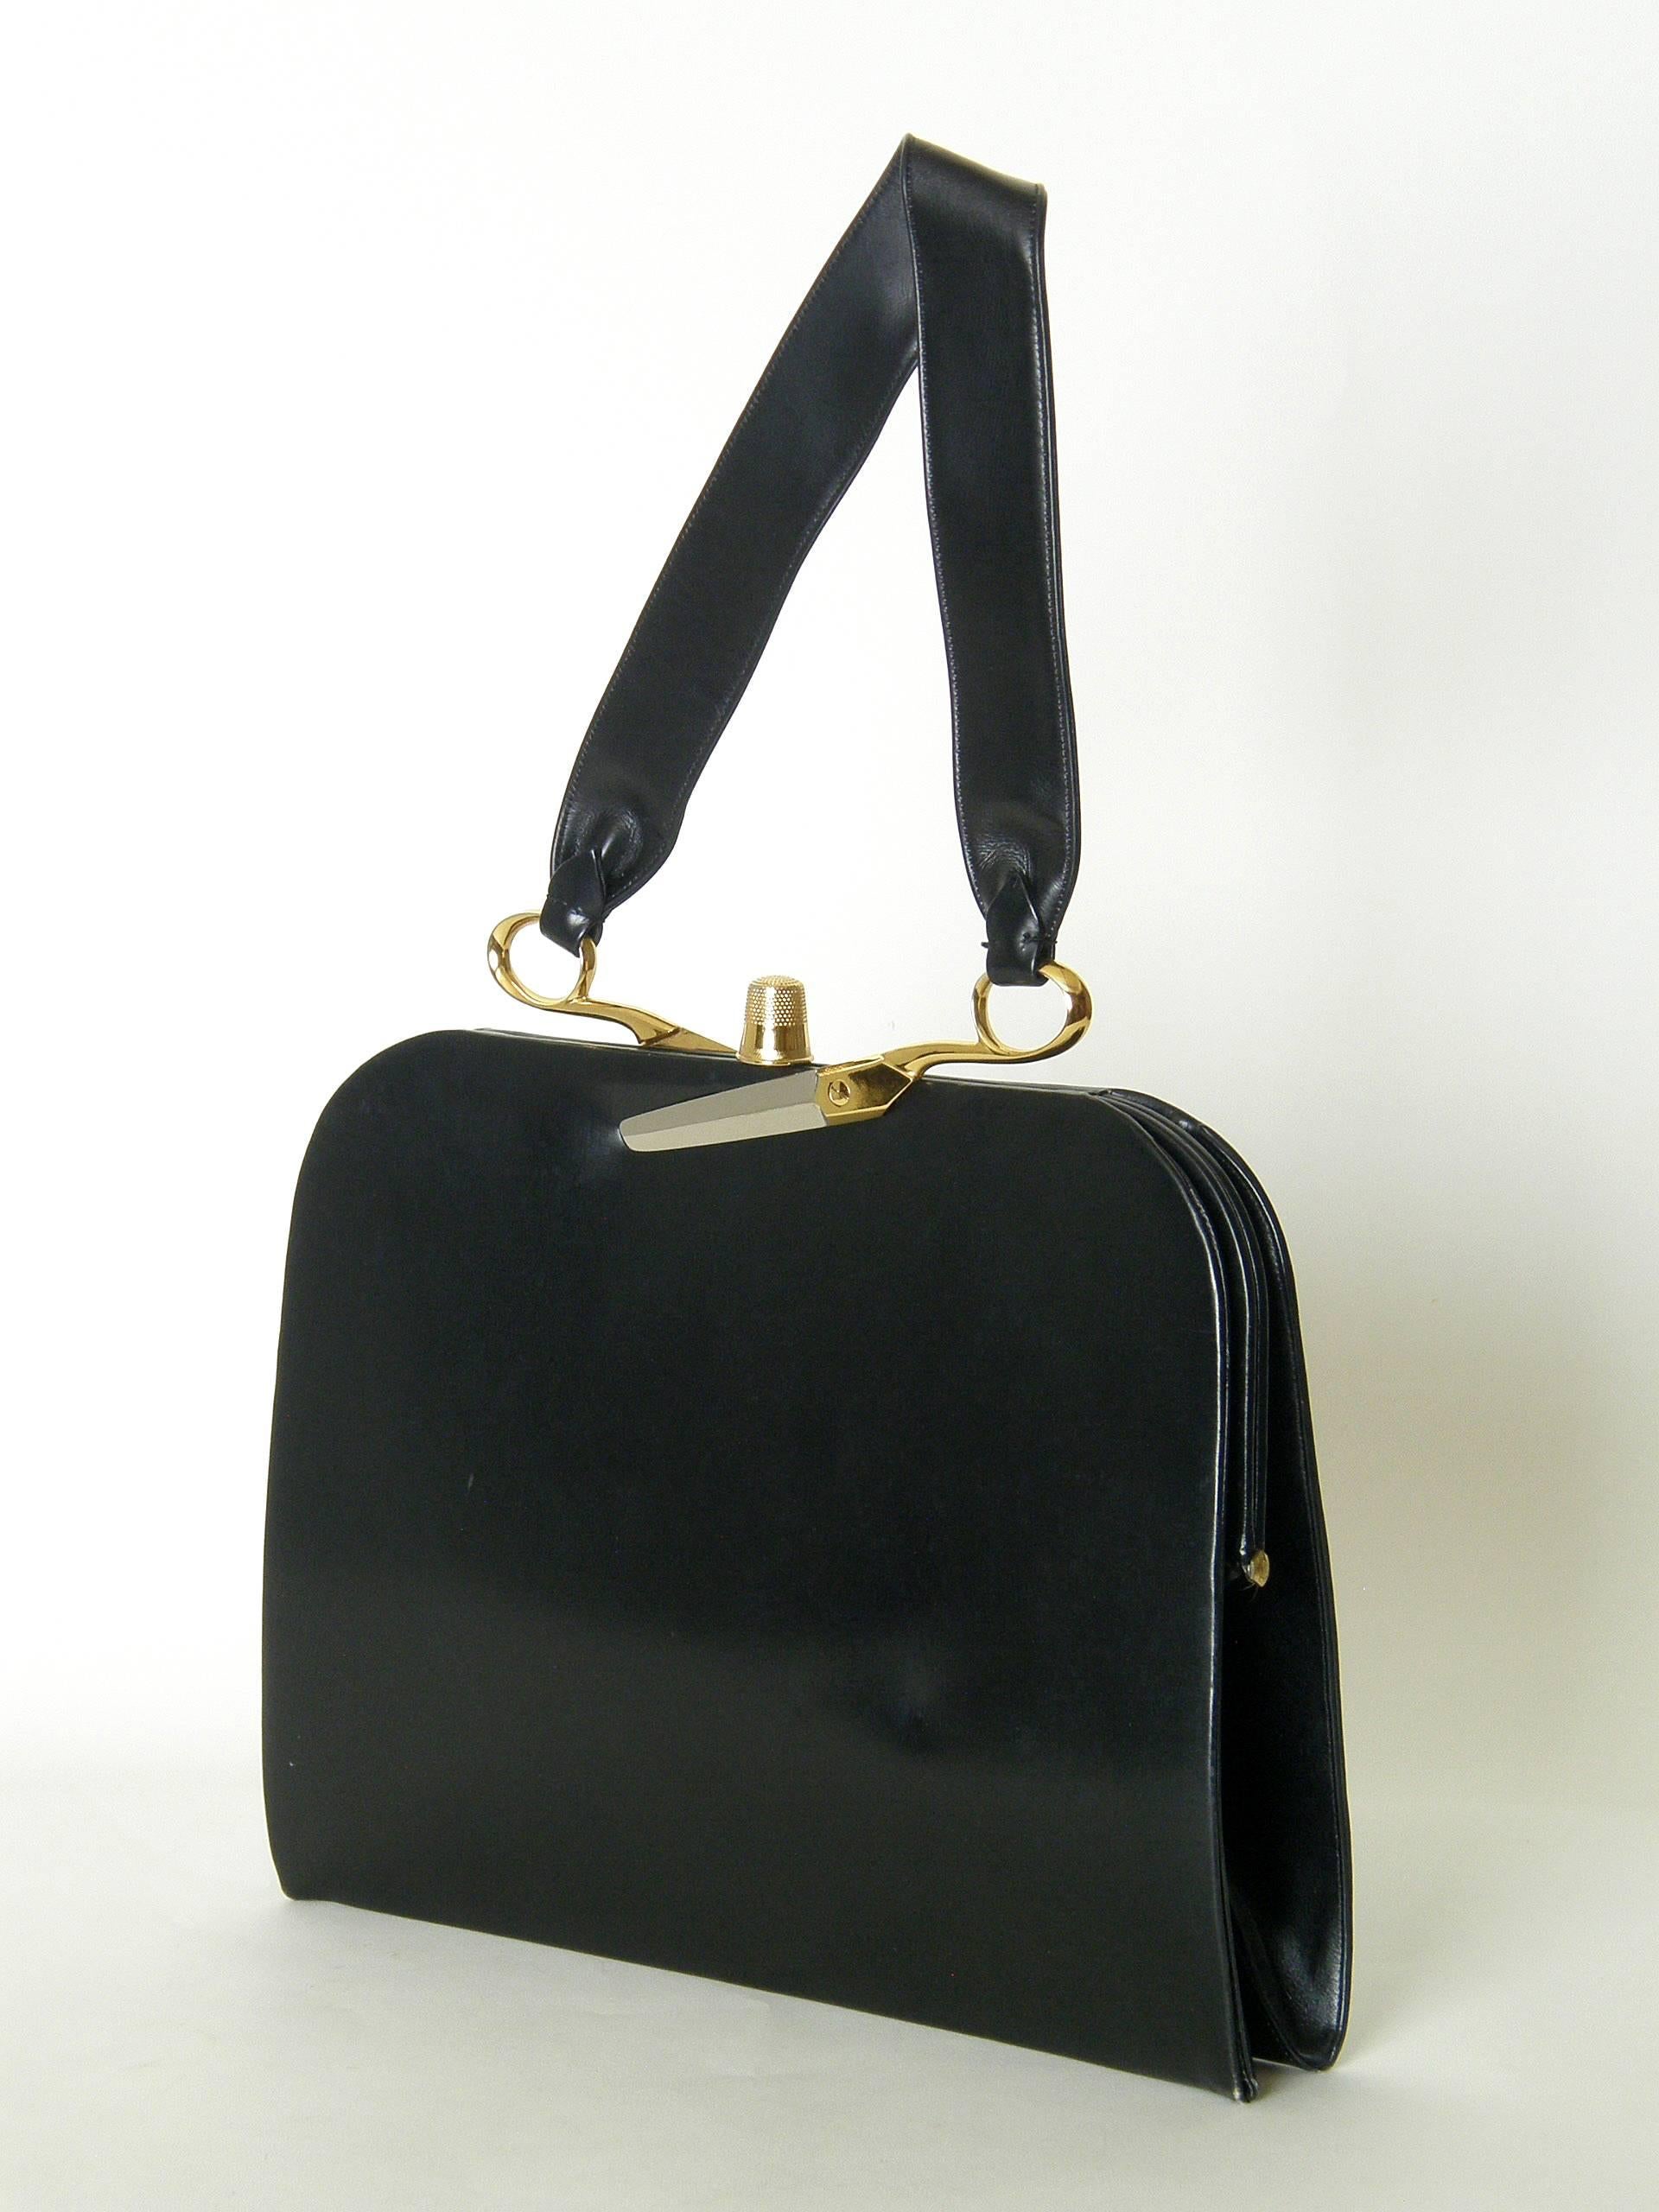 This exceptional Koret black leather handbag has dissected scissors attaching the handle to the frame and a thimble for the clasp. The yellow gold plated thimble and yellow and white gold plated scissors halves are extremely realistic. The black